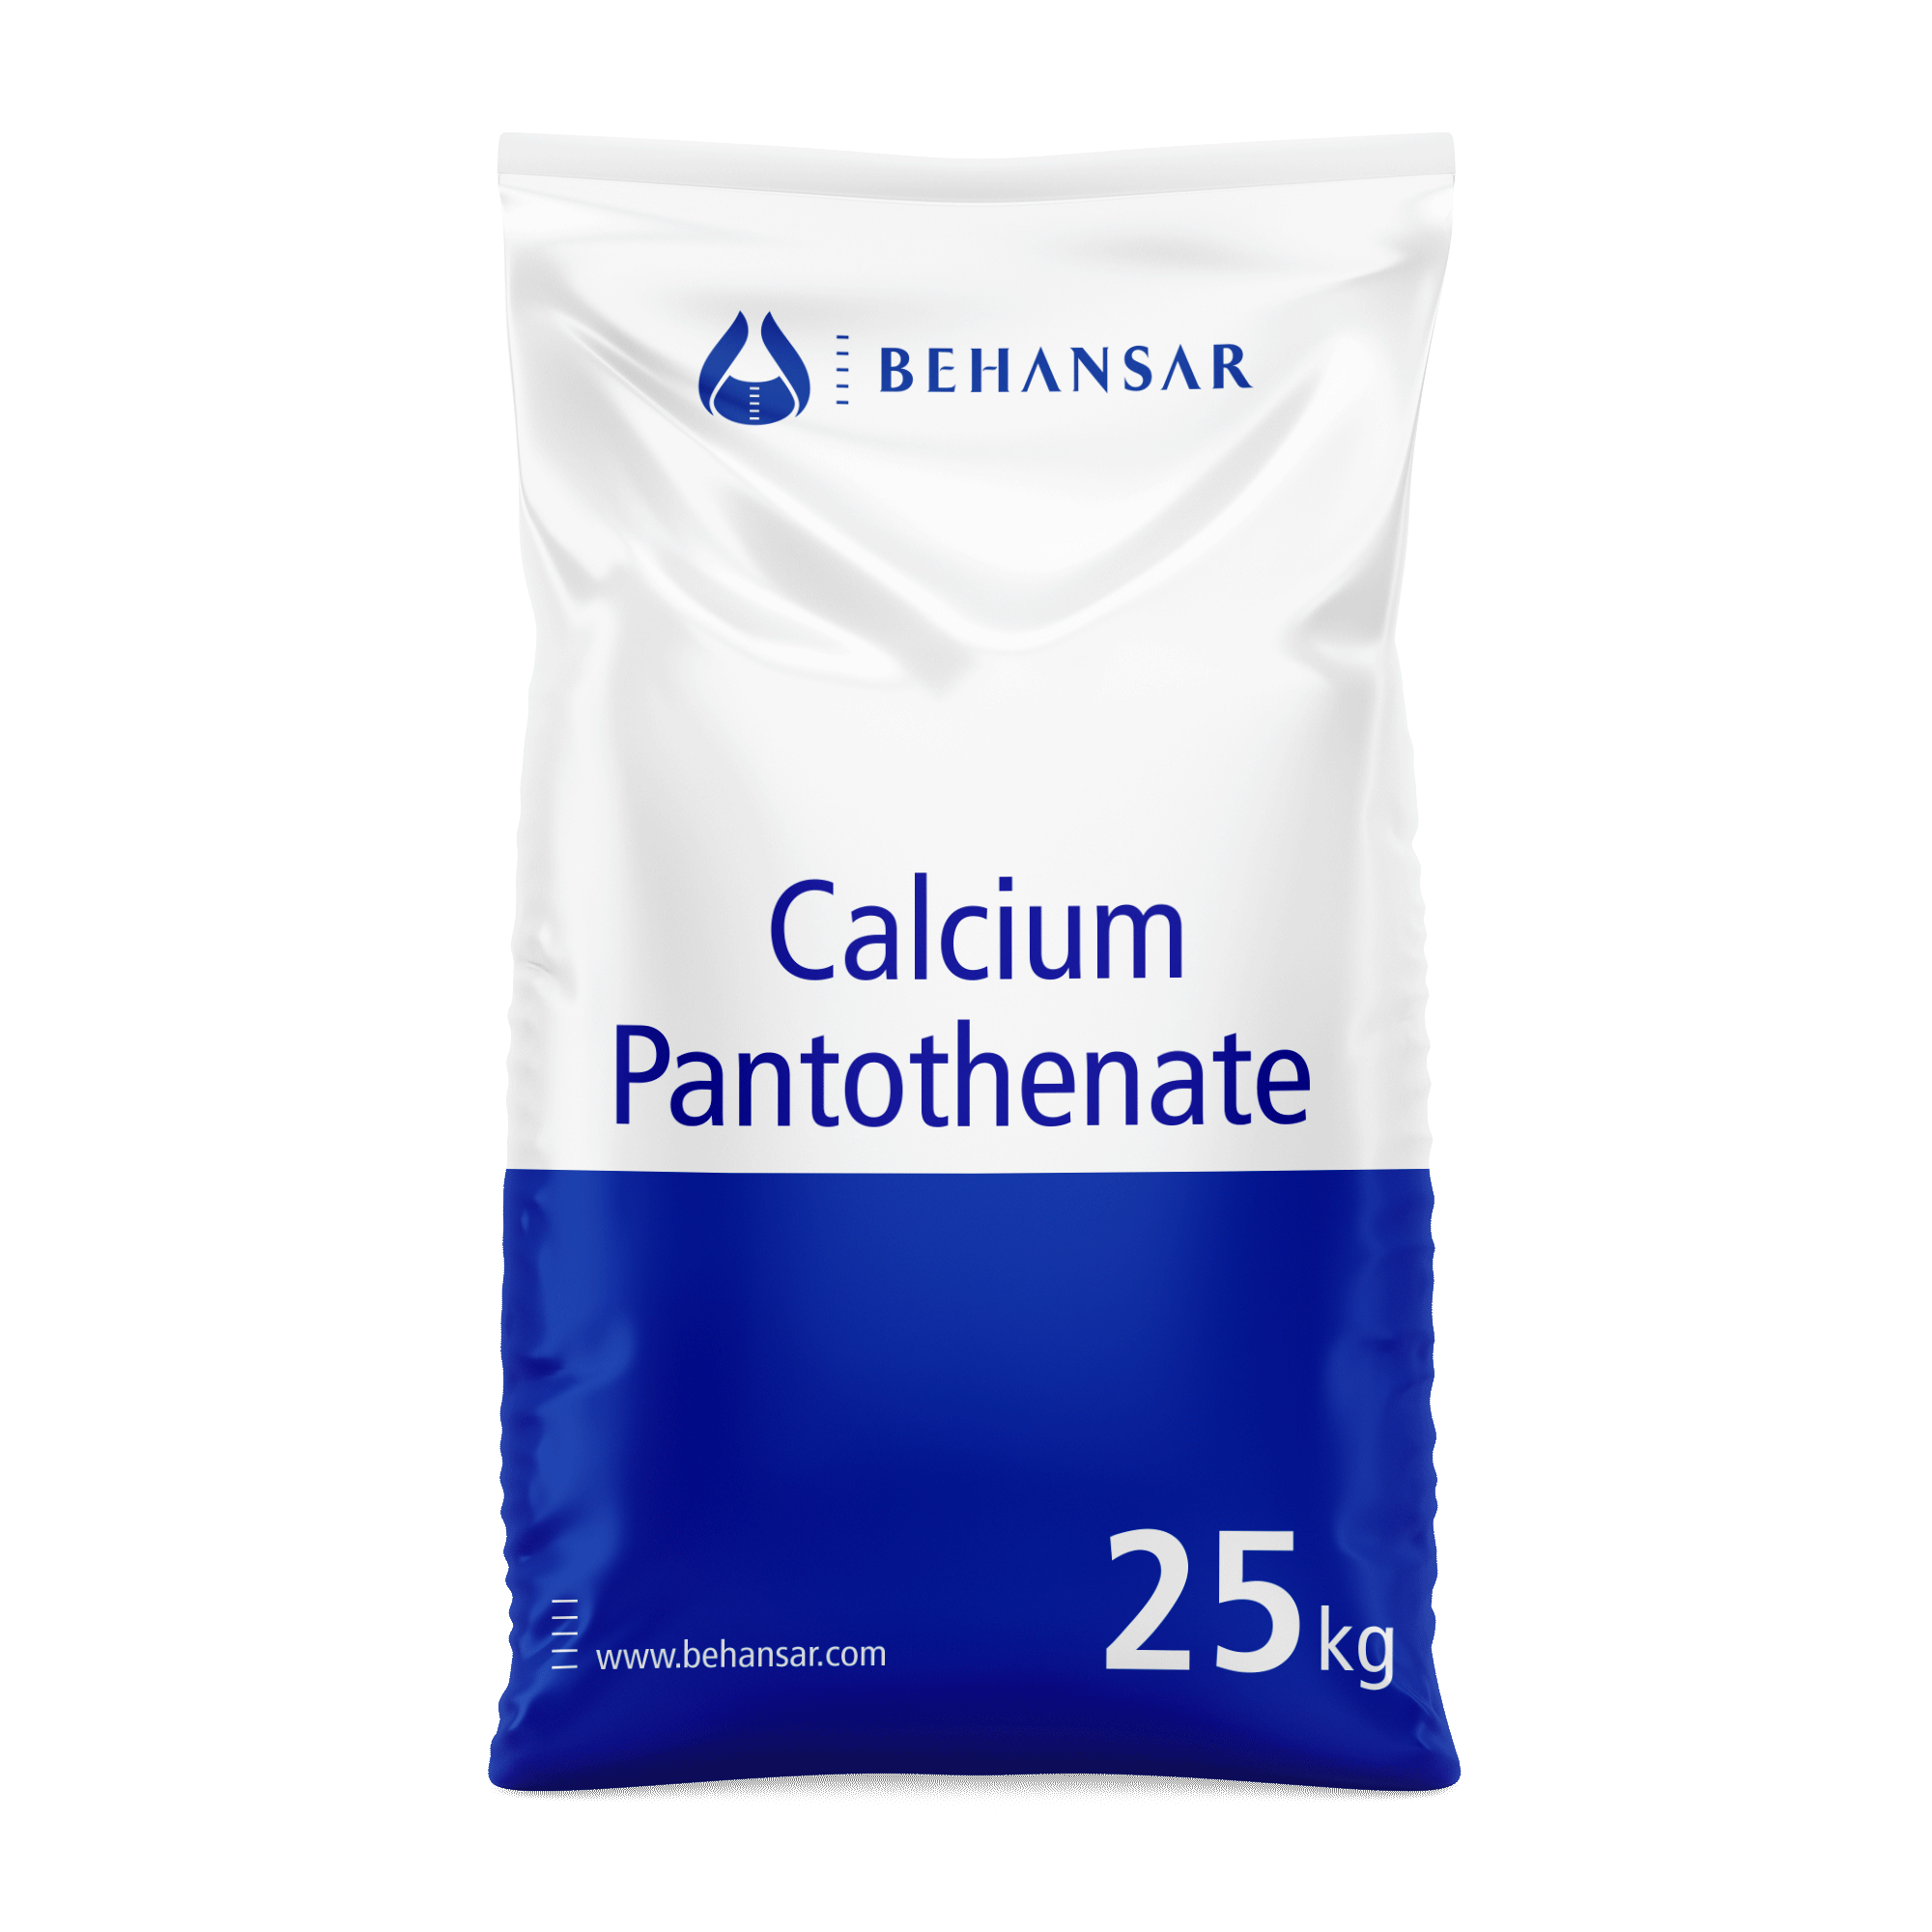 Calcium Pantothenate is one of the products of Behansar Co